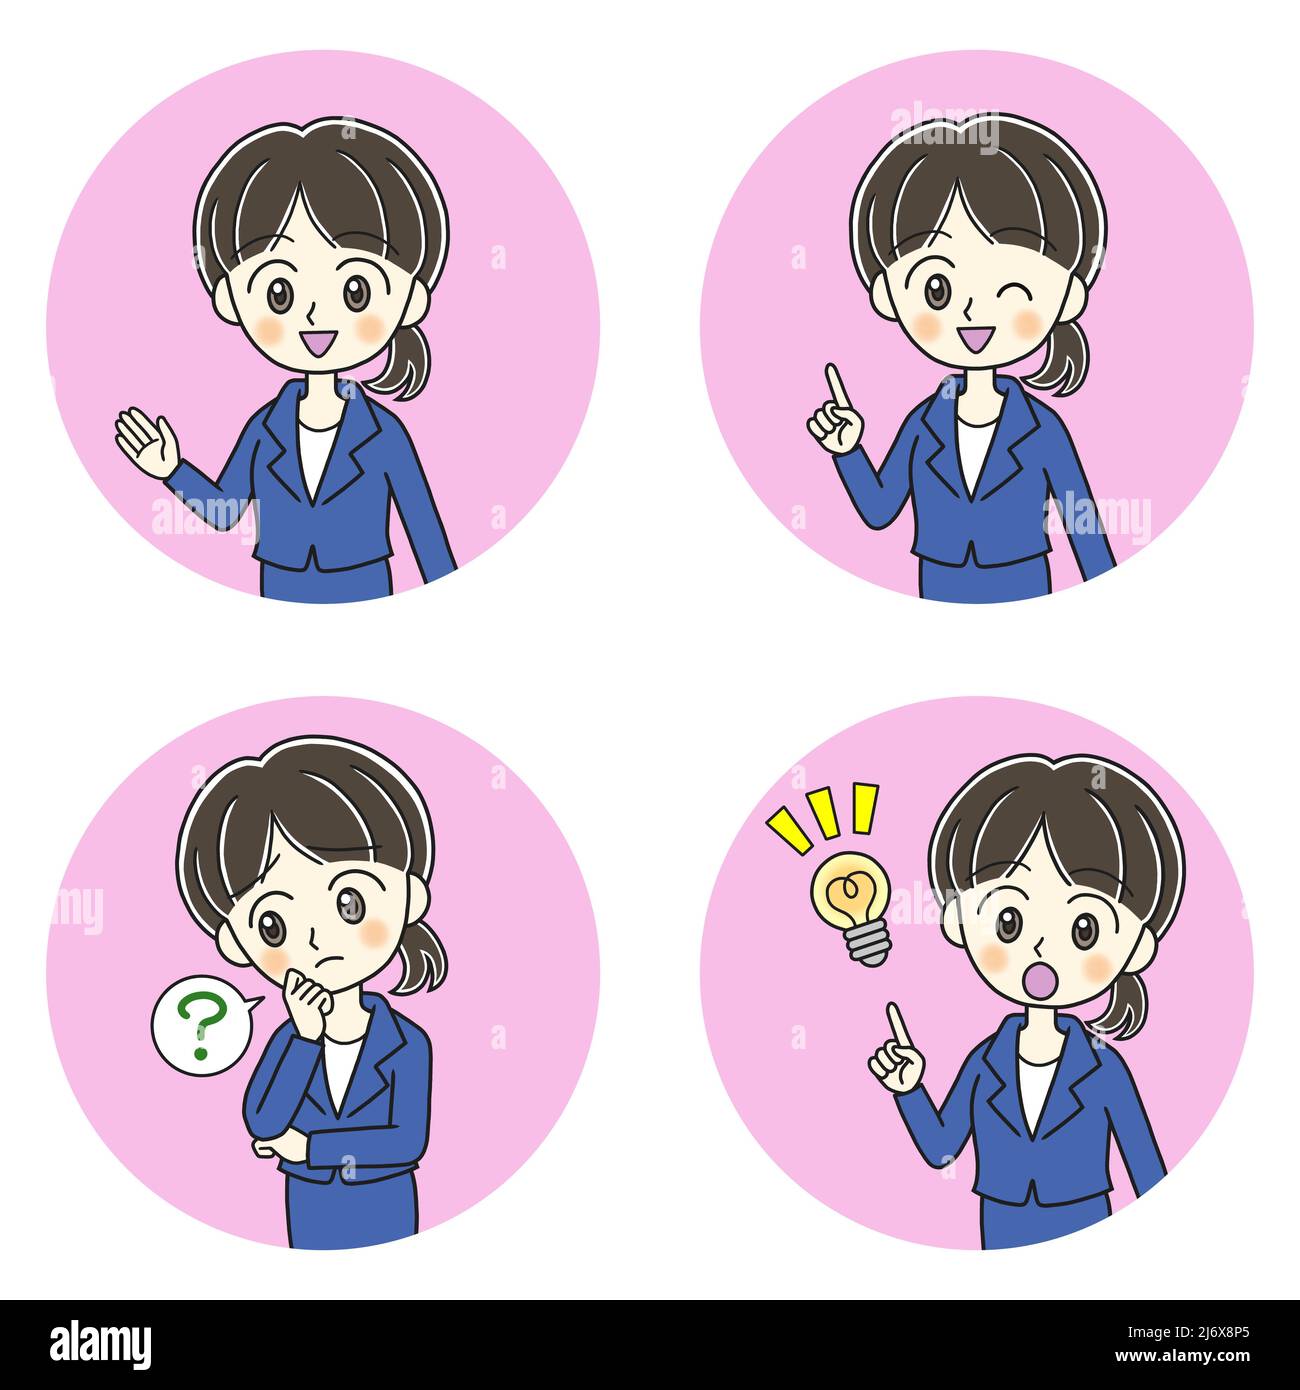 Four poses of a young woman in a blue suit on pink circles Stock Photo